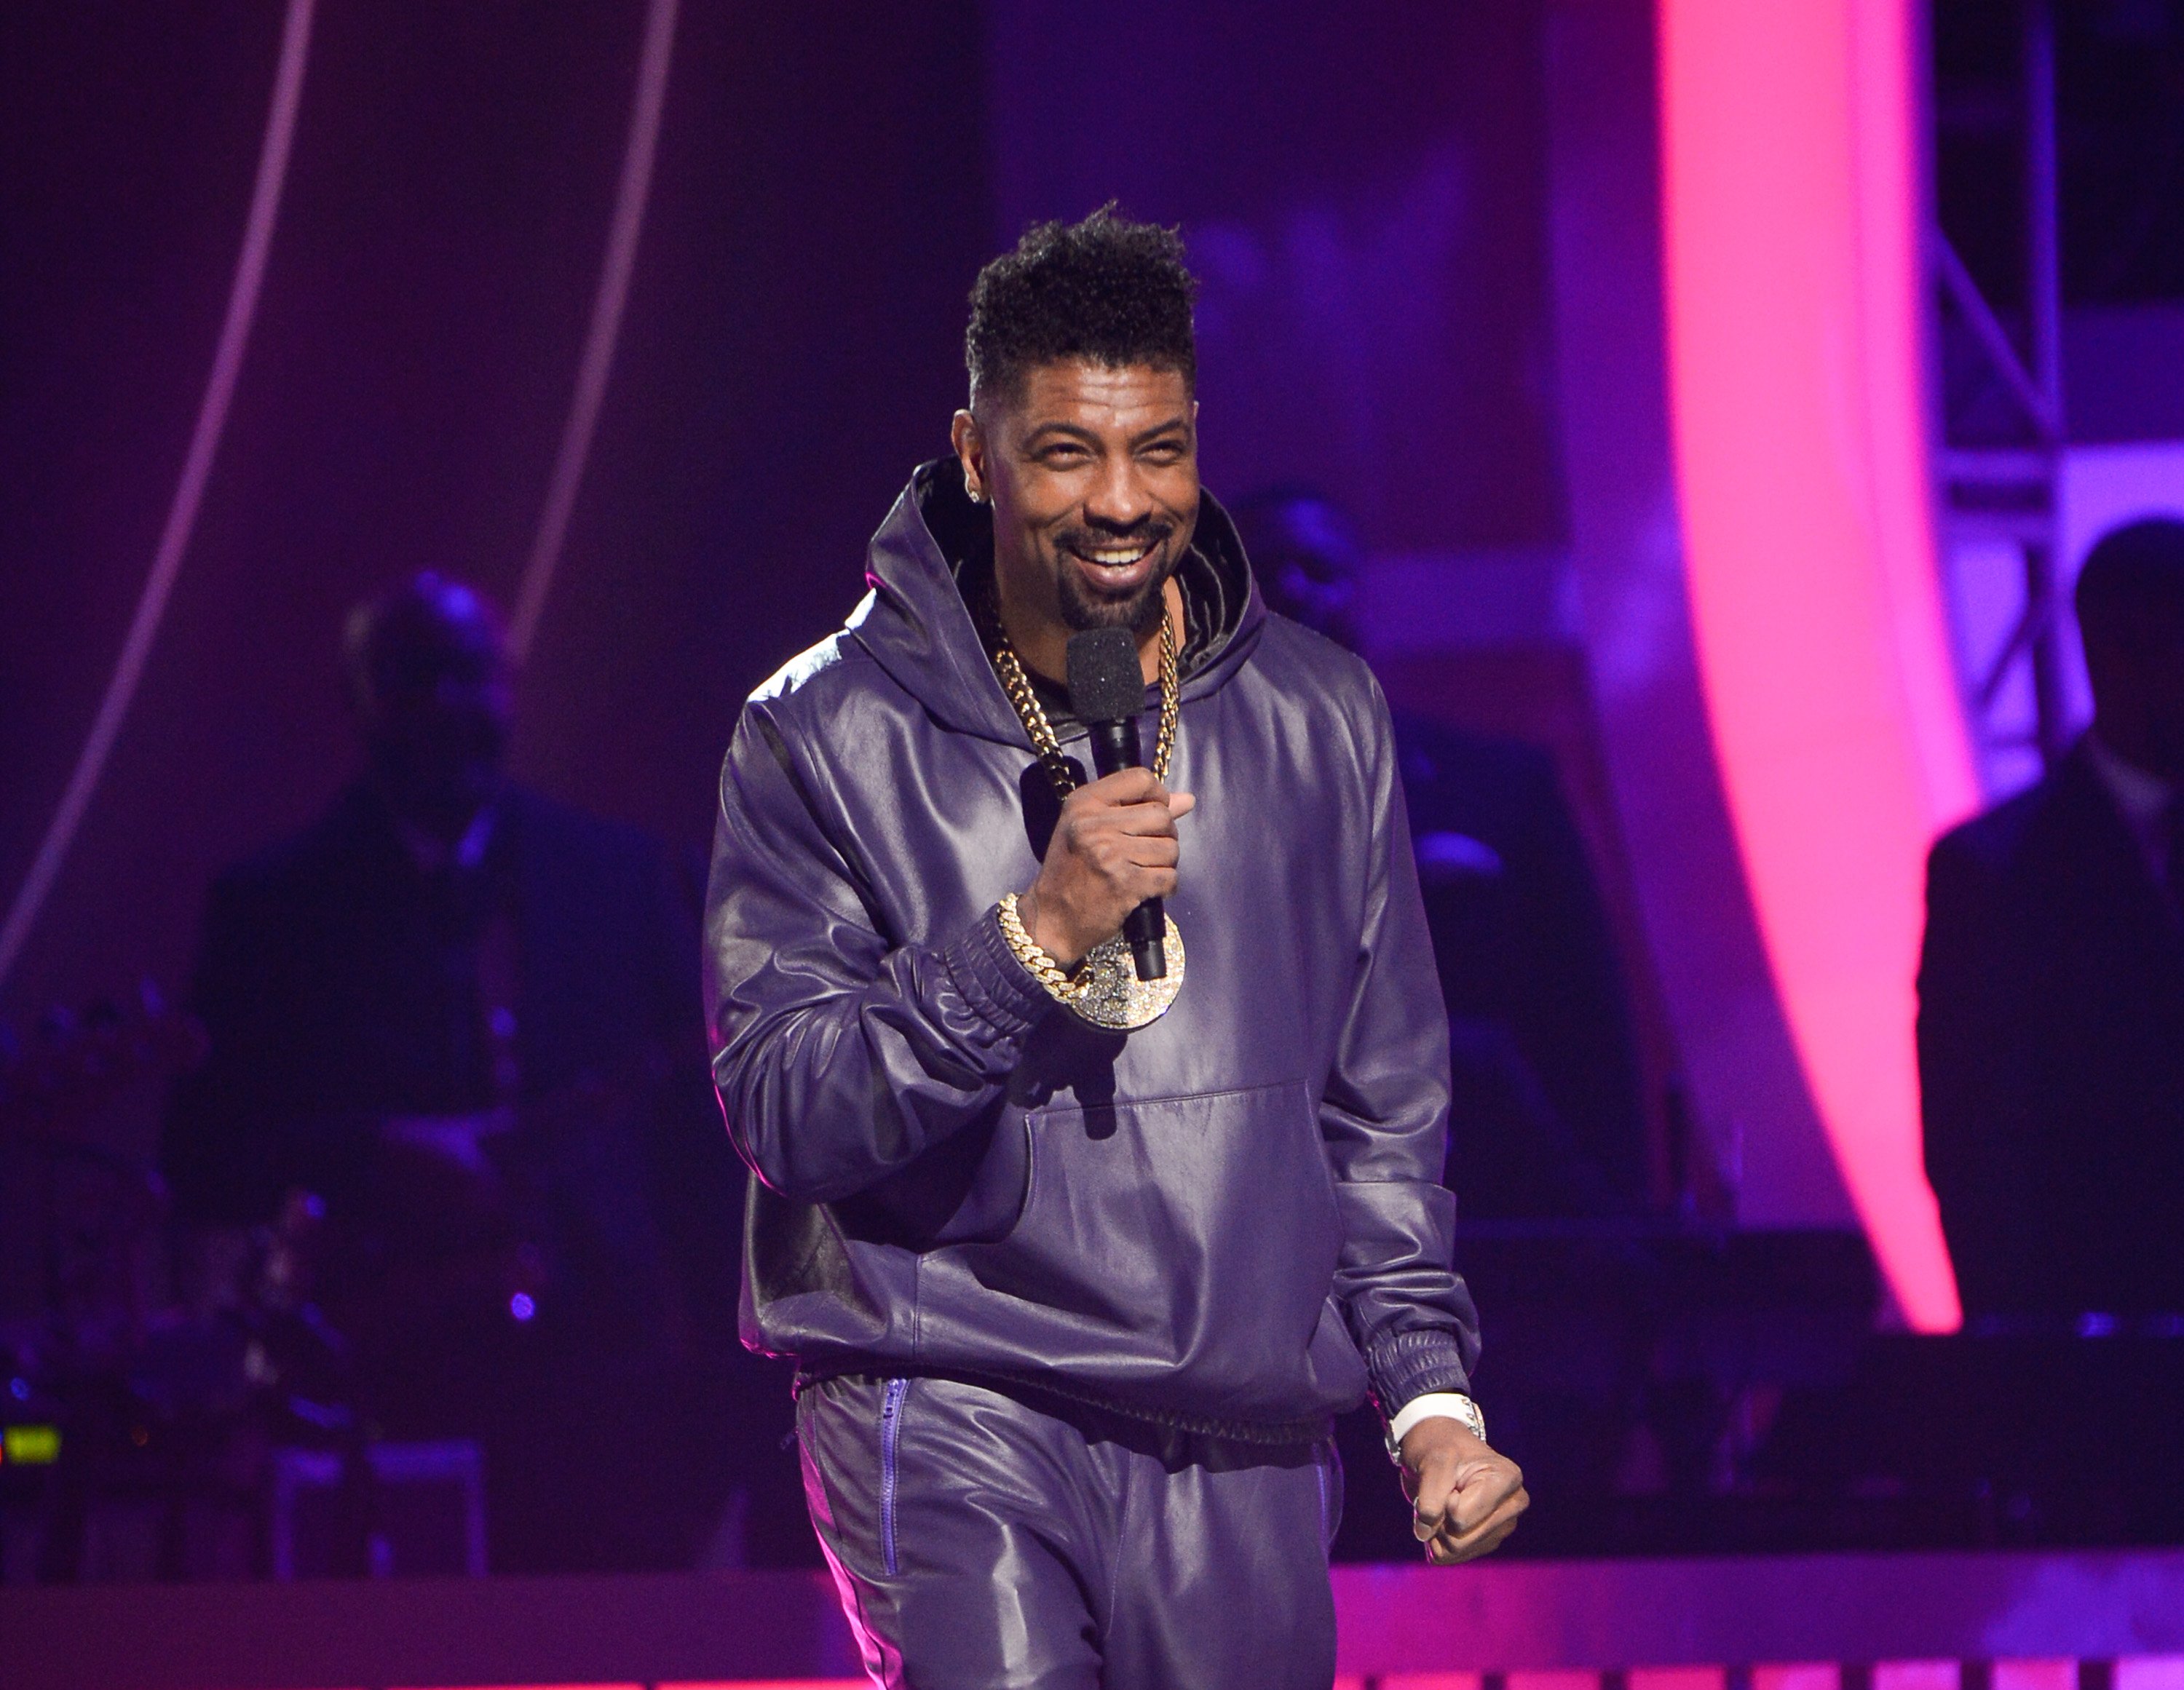 Deon Cole onstage during 2022 Soul Train Awards at the Orleans Arena, in Las Vegas, Nevada, on November 13, 2022 | Source: Getty Images